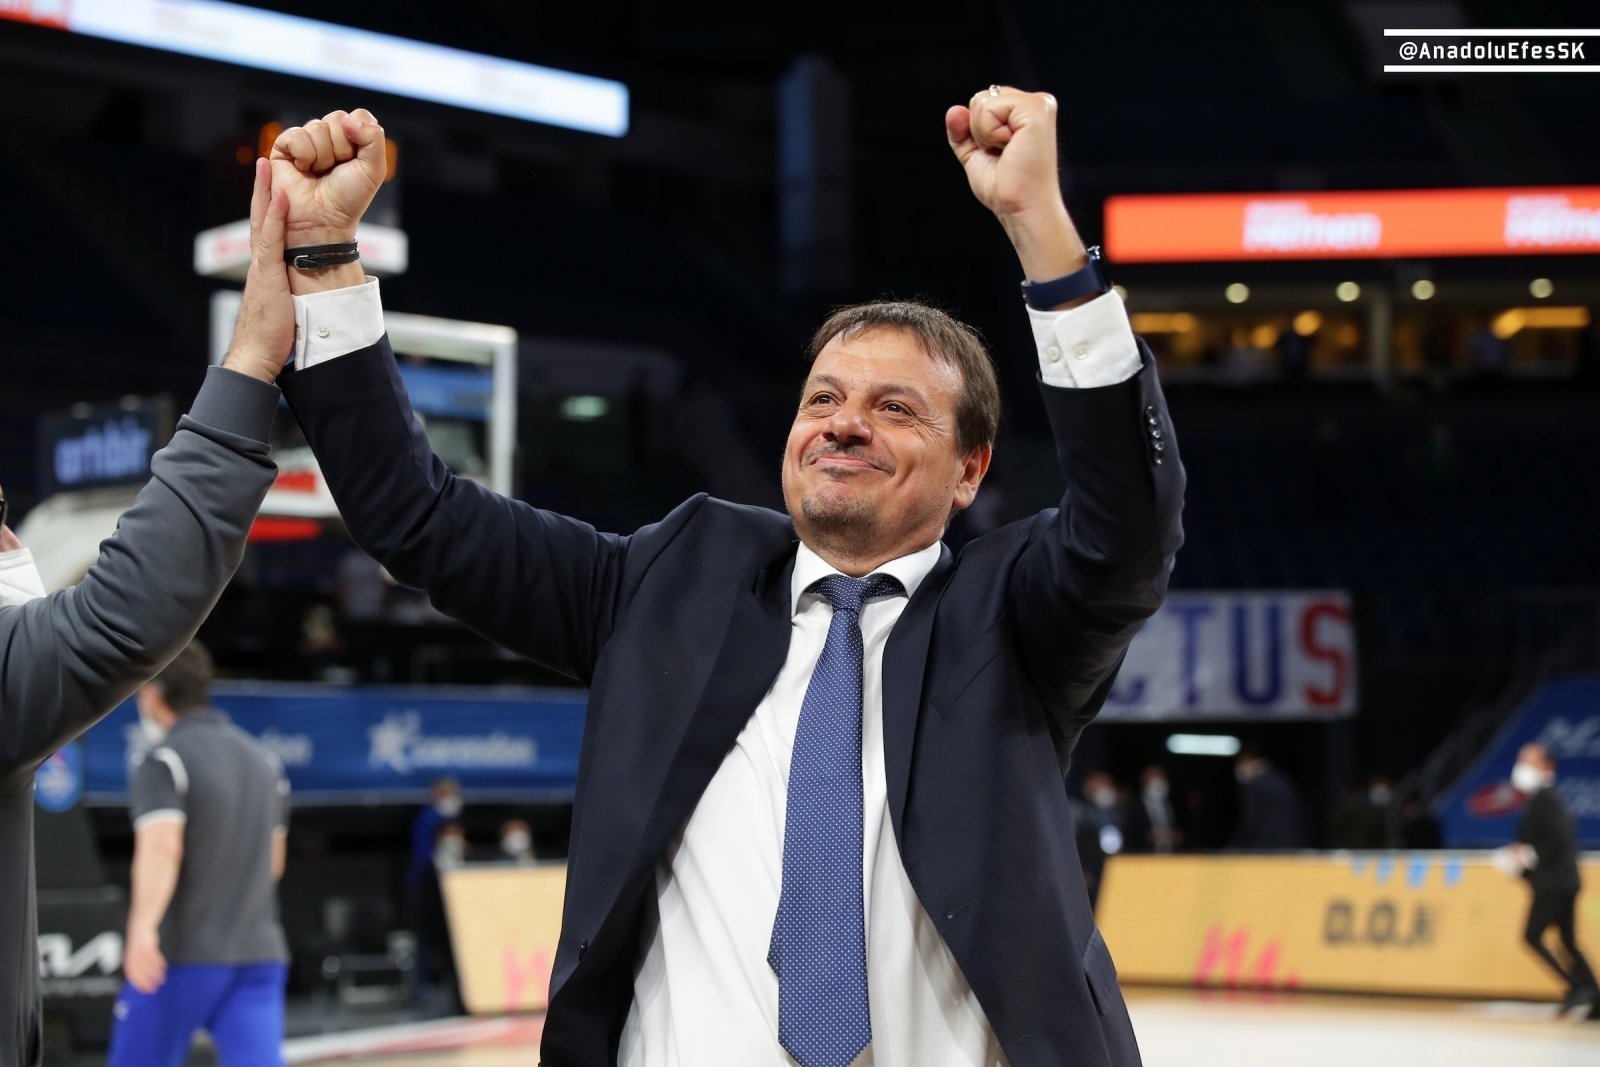 Ergin Ataman, the head coach of Anadolu Efes, celebrates after beating Real Madrid at the Sinan Erdem Dome, Istanbul, Turkey, May 4, 2021. (DHA Photo)